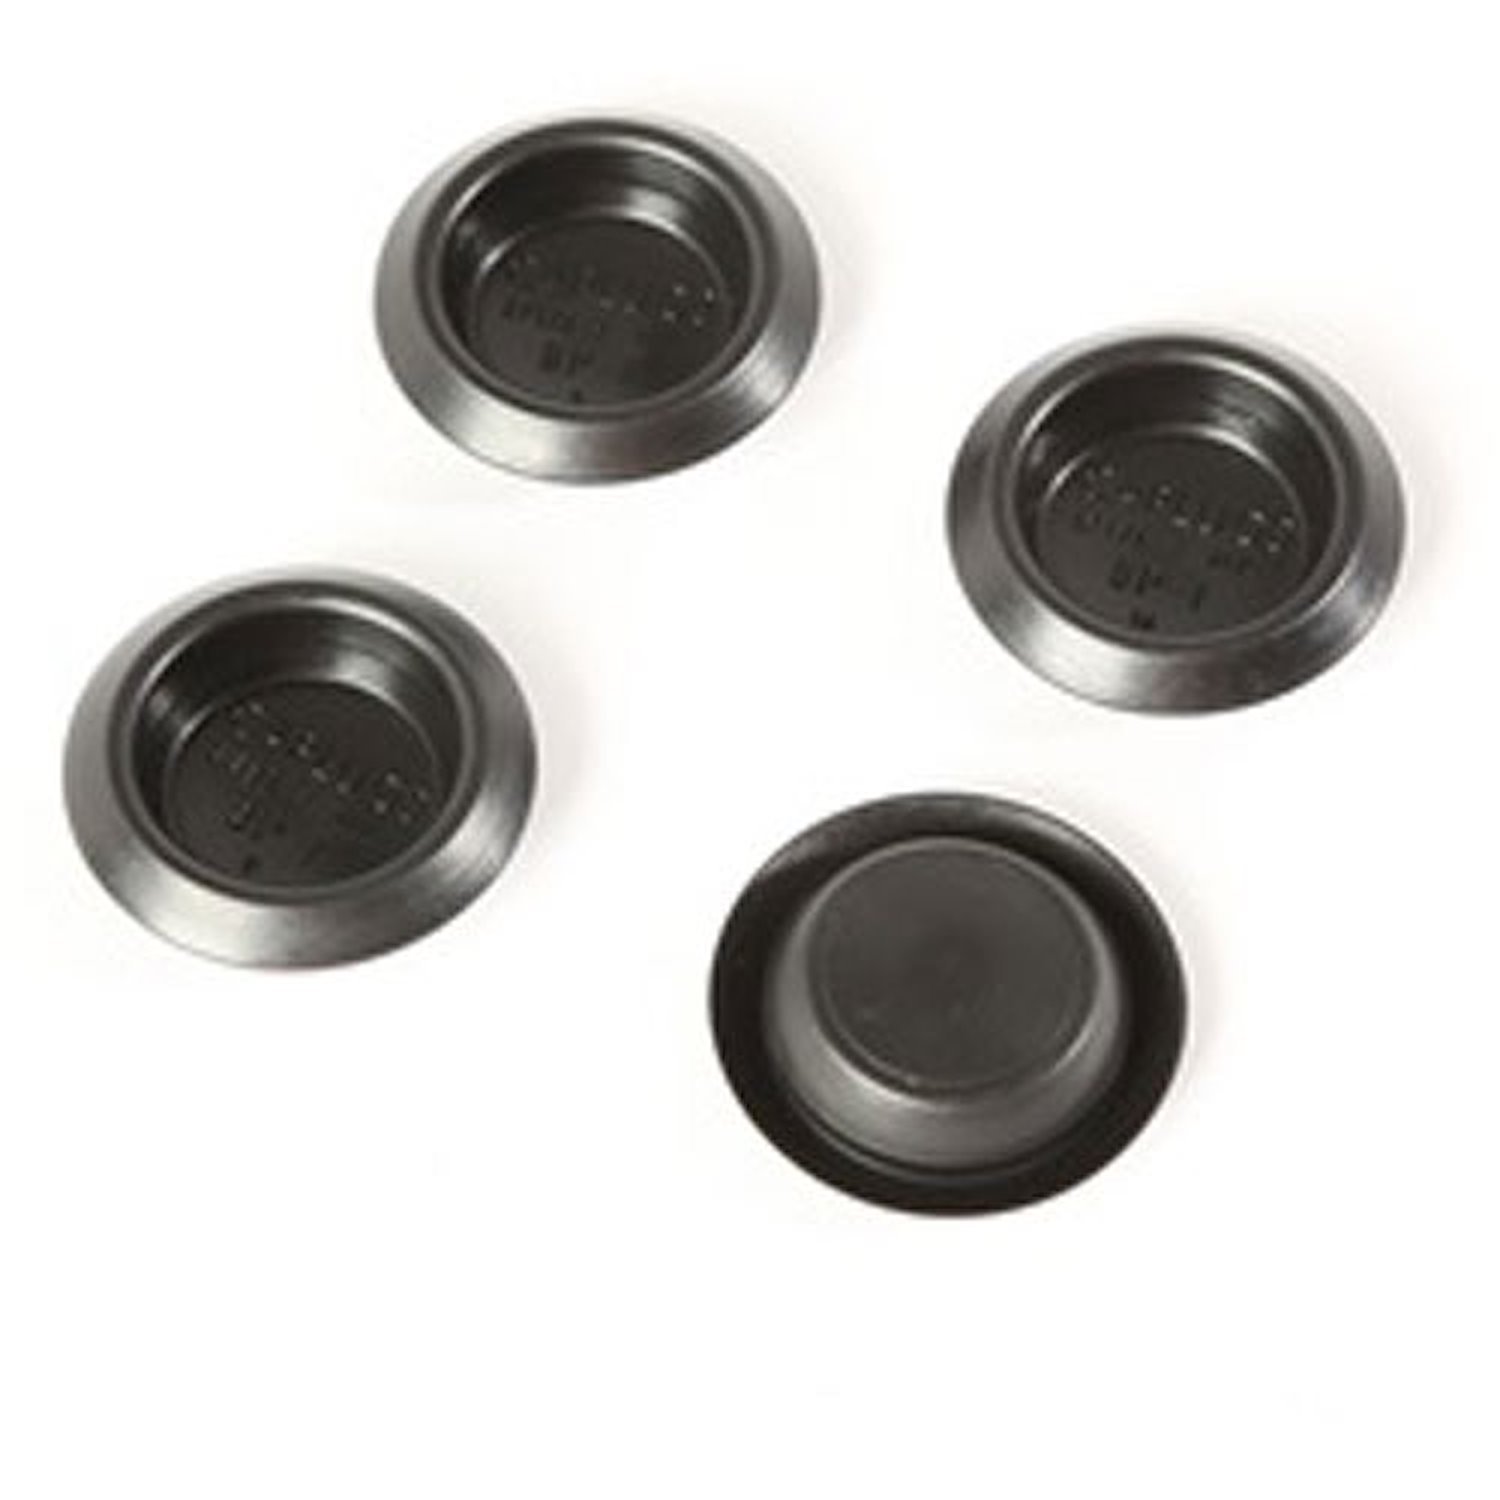 This 4 piece drain plug kit from Omix-ADA fits the 1 inch floor pan drain holes in 76-86 Jeep CJ7 and 81-86 CJ8.